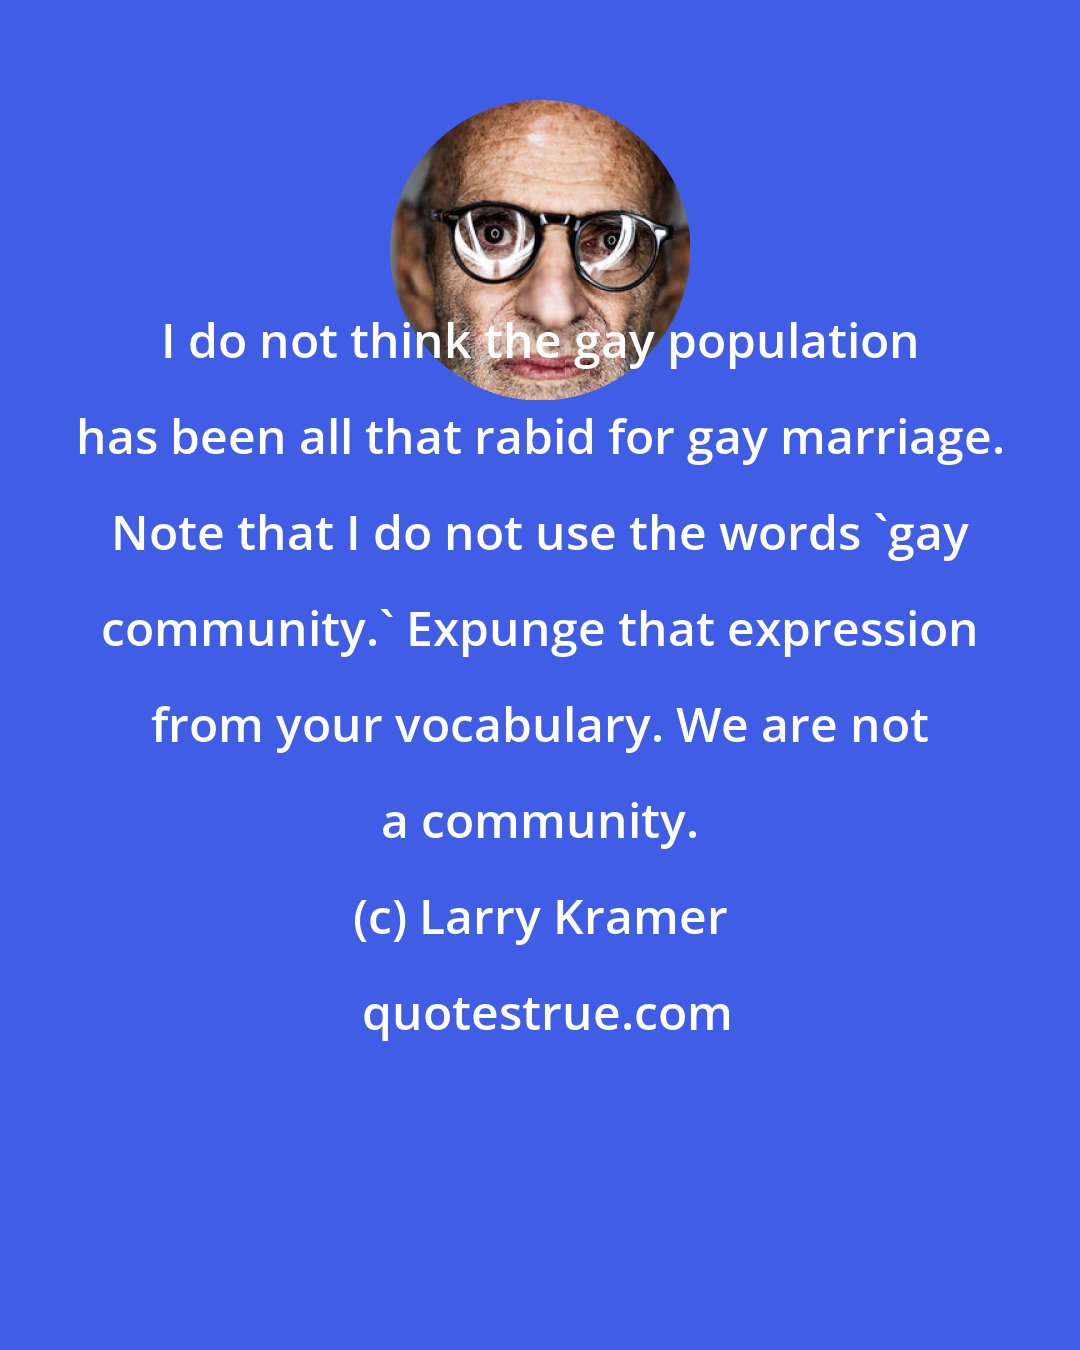 Larry Kramer: I do not think the gay population has been all that rabid for gay marriage. Note that I do not use the words 'gay community.' Expunge that expression from your vocabulary. We are not a community.